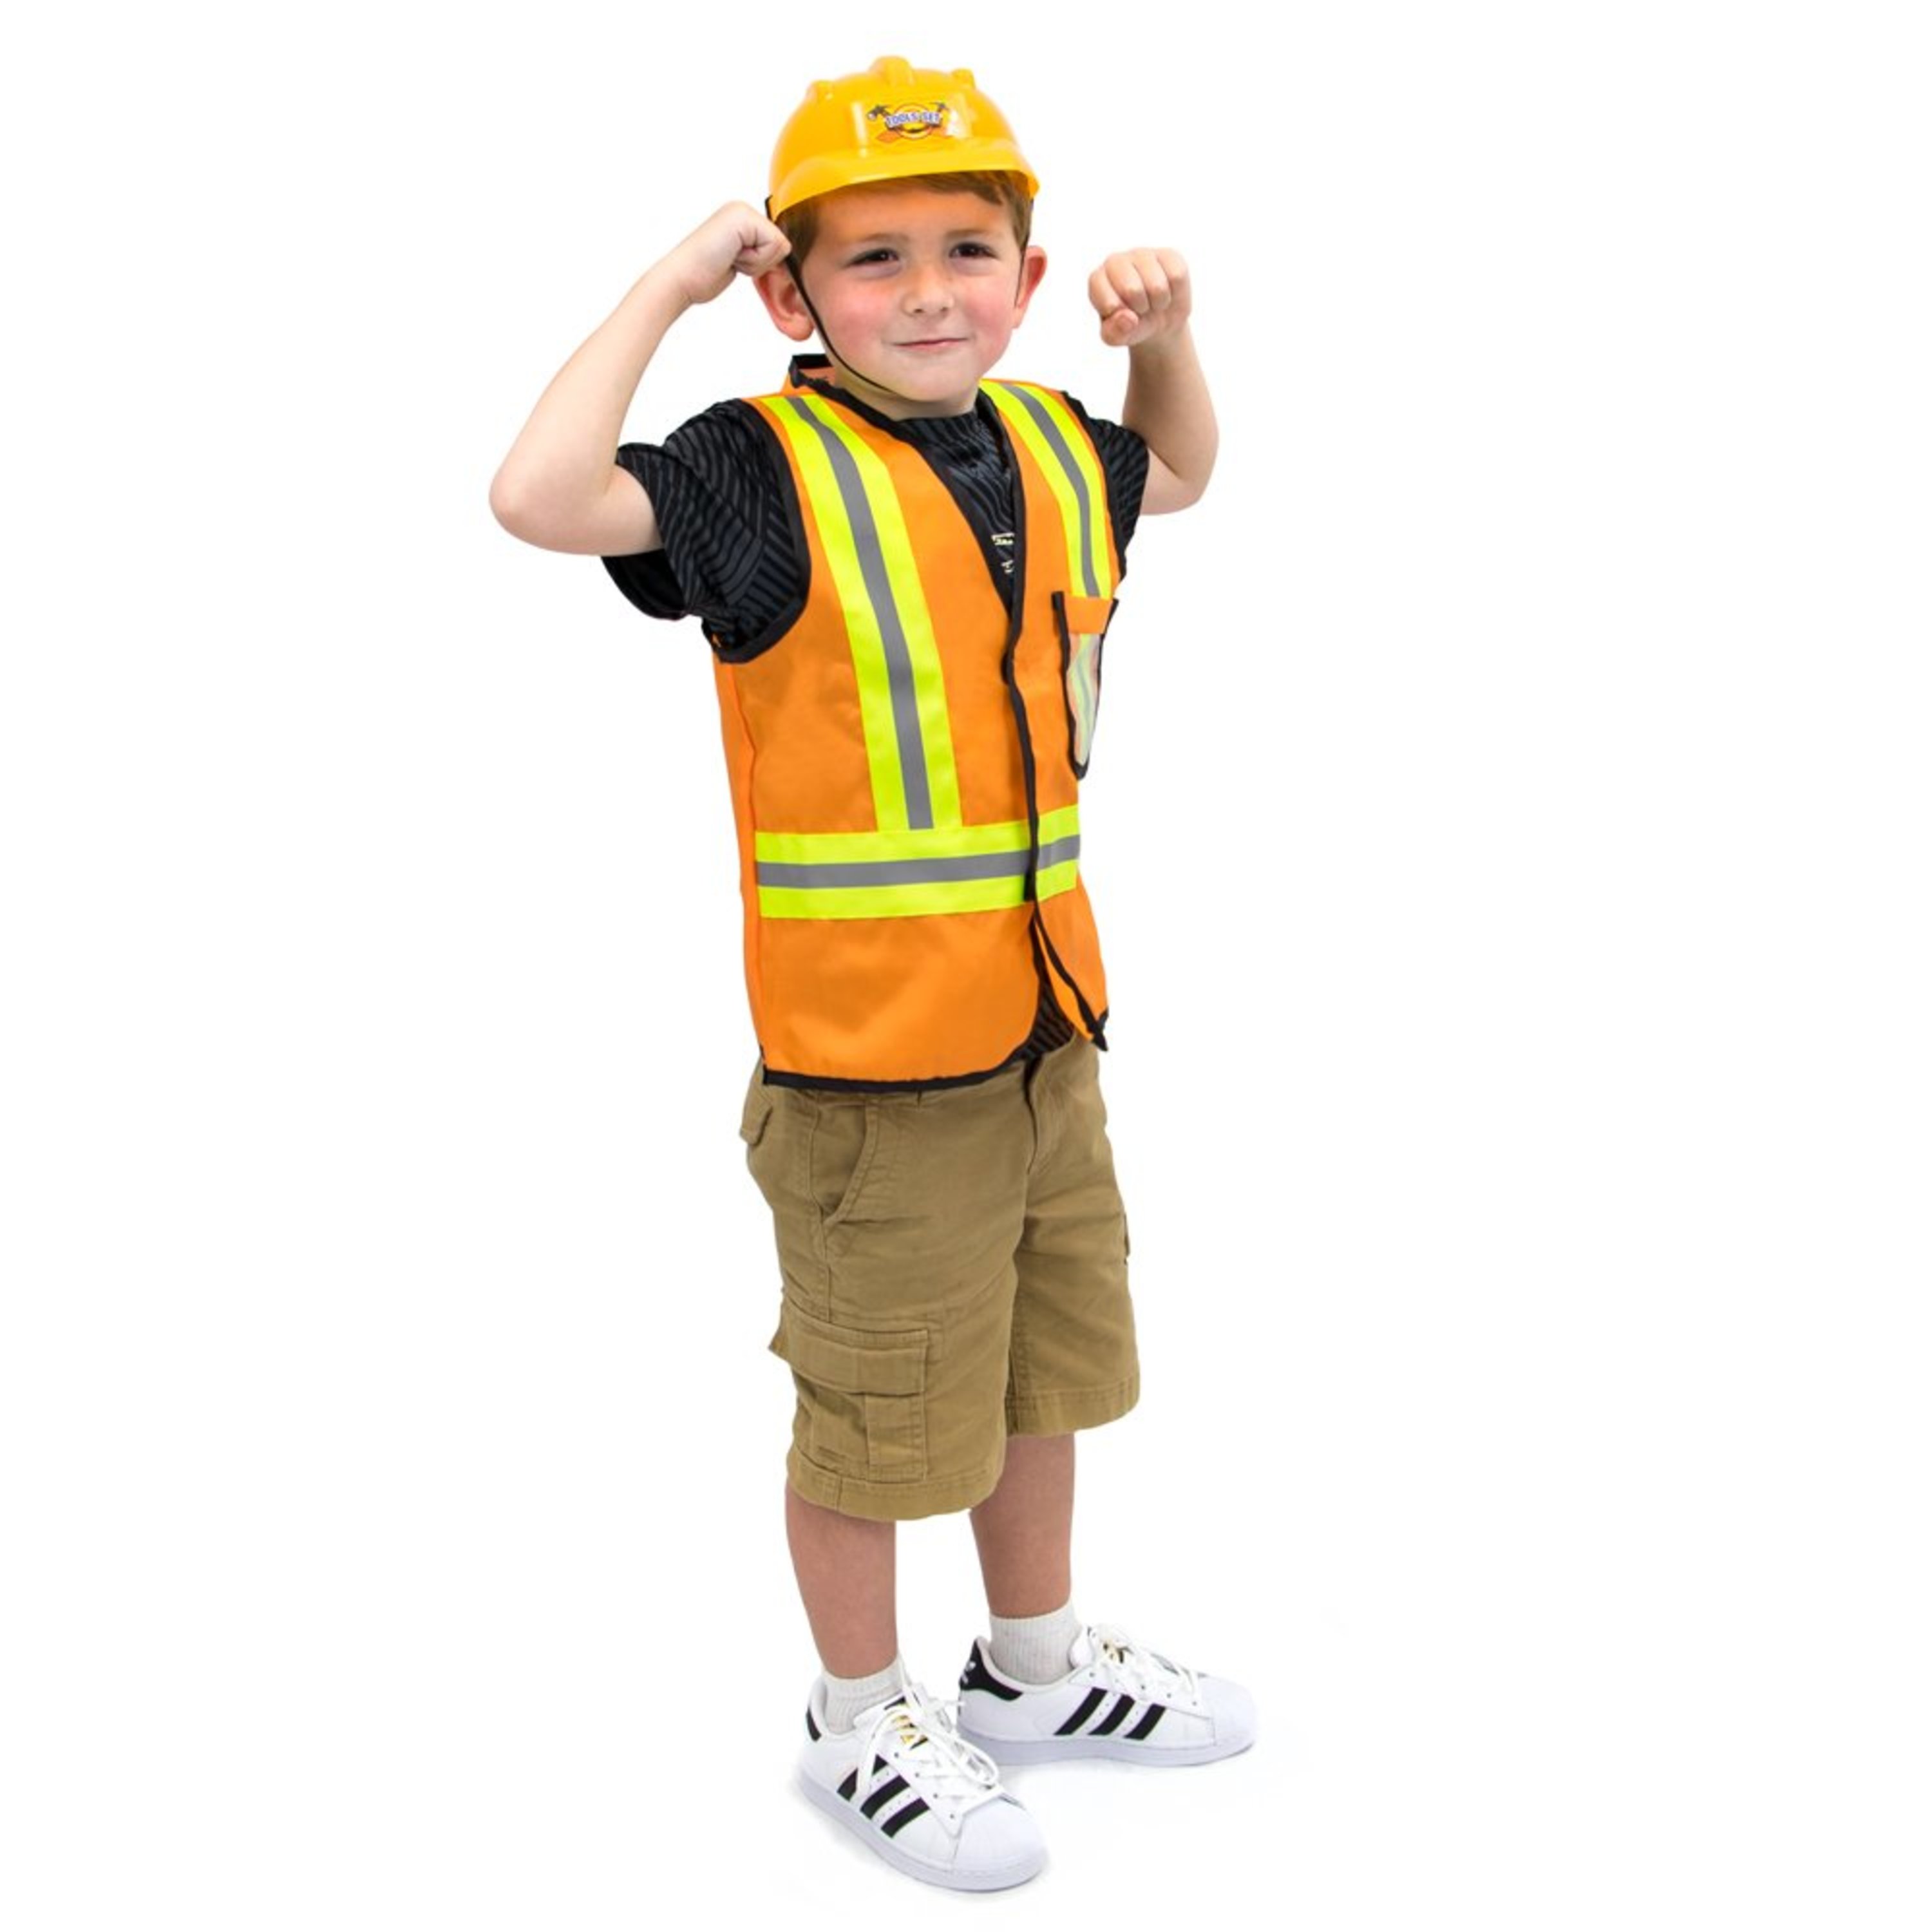 Construction Worker Children's Halloween Dress Up Roleplay Costume YS 3-4 - image 3 of 7